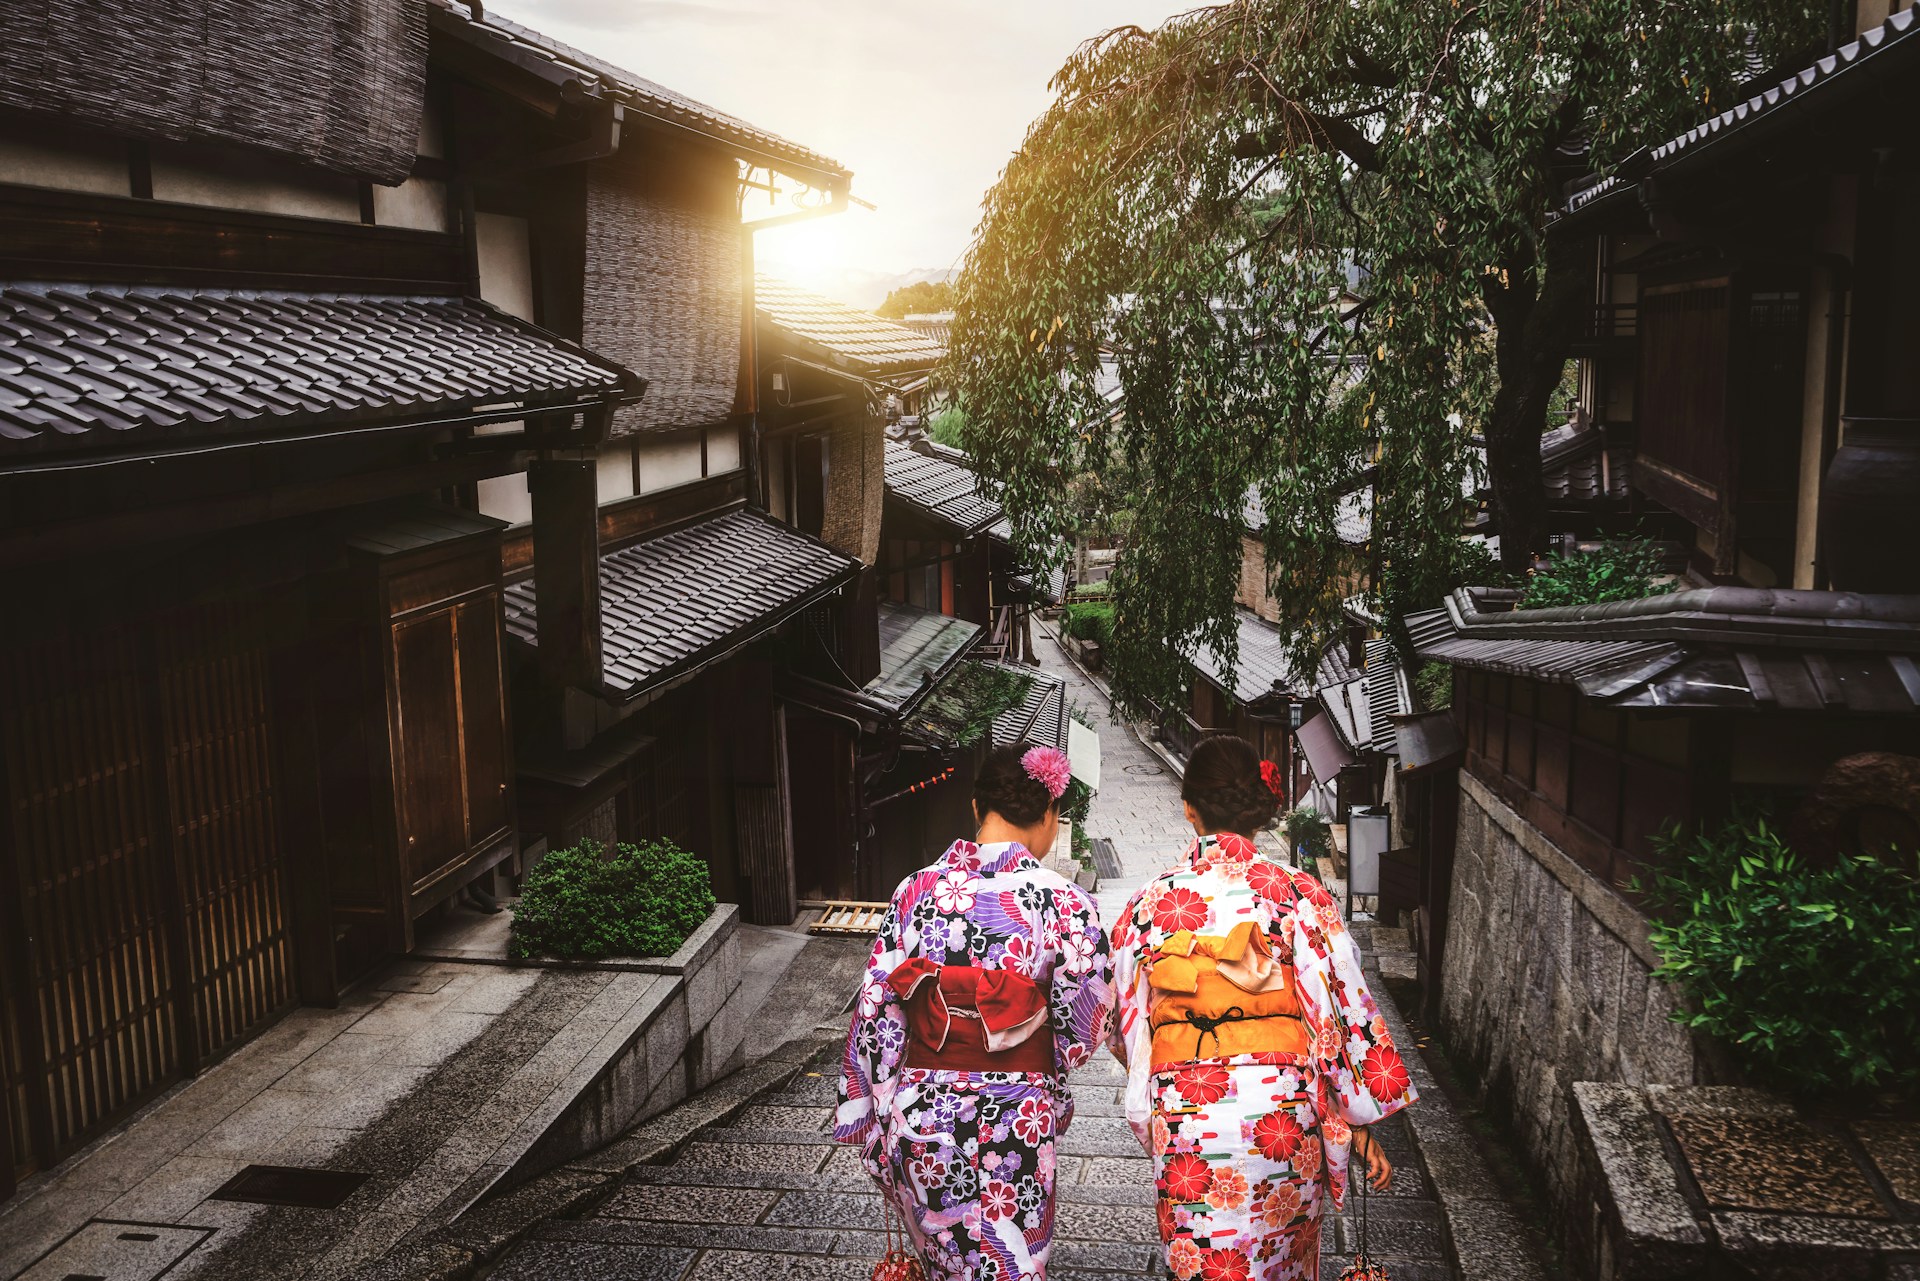 Two Geishas in Kyoto, photographed from behind, walking down a narrow street